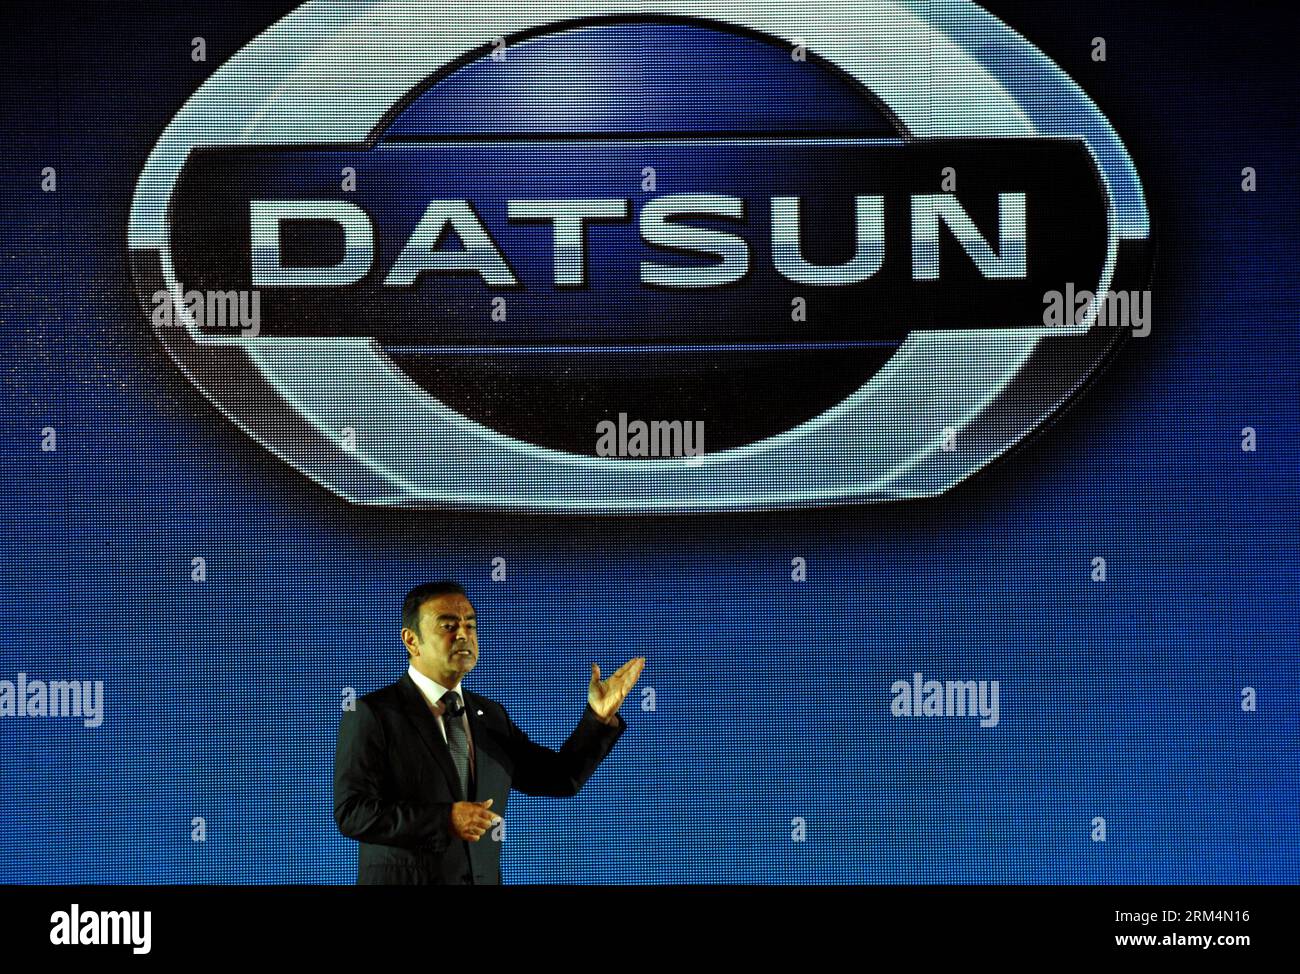 Bildnummer: 60489601  Datum: 17.09.2013  Copyright: imago/Xinhua JAKARTA,  -- Nissan Motor President and Chief Executive Officer Carlos Ghosn speaks at the launching ceremony of Datsun automobiles in Jakarta, Indonesia, Sept. 17, 2013. Datsun comes back to Indonesia after 32 years. (Xinhua/Agung Kuncahya B.)(lrz) INDONESIA-JAKARTA-LAUNCHING-DATSUN PUBLICATIONxNOTxINxCHN Wirtschaft people x0x xkg 2013 quer premiumd     60489601 Date 17 09 2013 Copyright Imago XINHUA Jakarta Nissan Engine President and Chief Executive Officer Carlos Ghosn Speaks AT The Launching Ceremony of Datsun Automobiles in Stock Photo